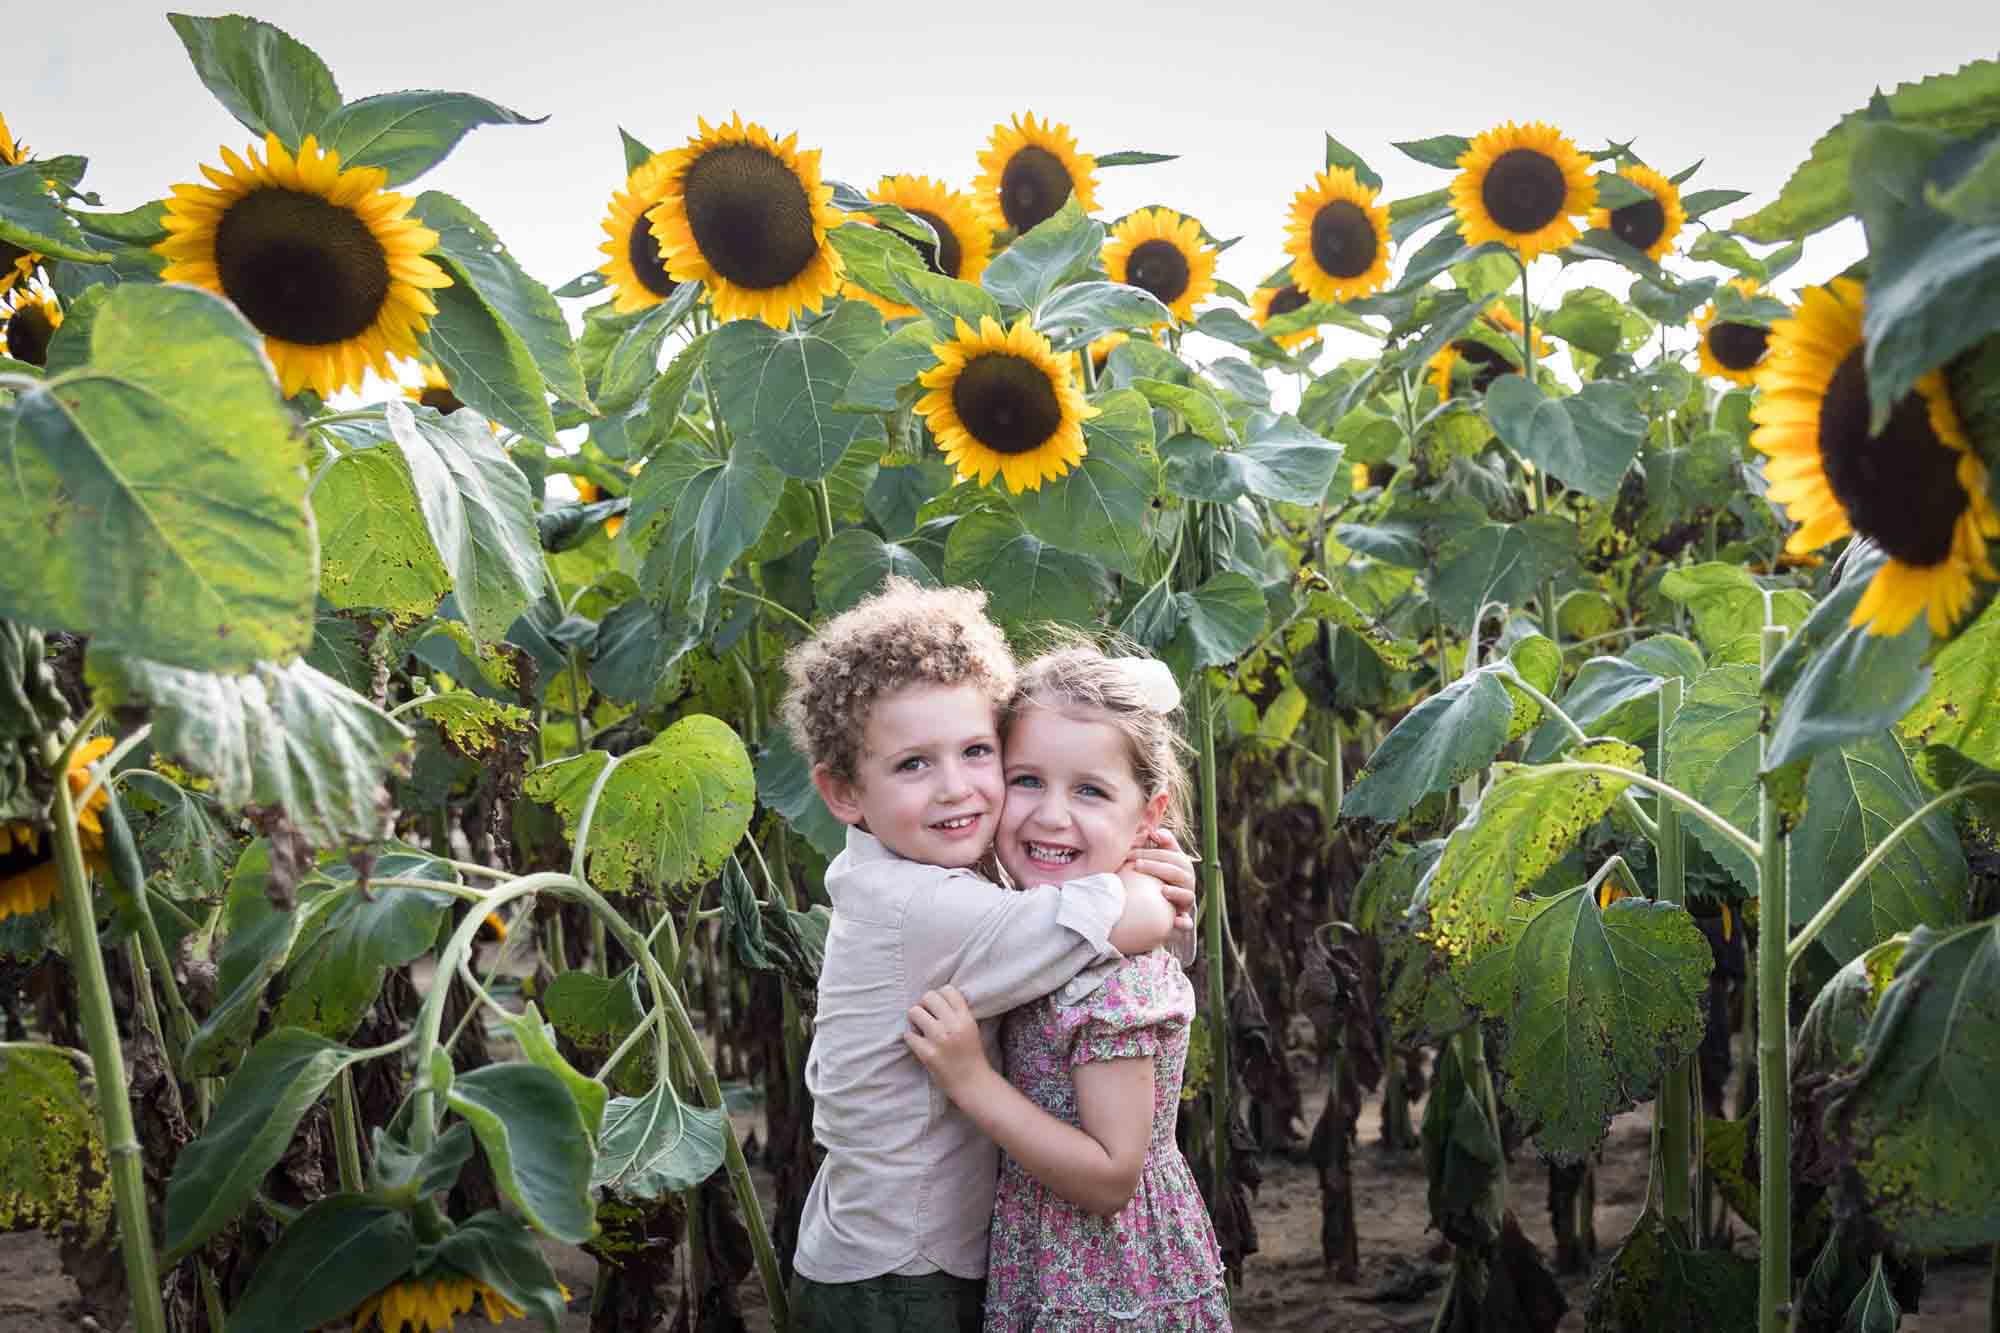 Little boy and girl hugging in sunflower field for an article on sunflower photo shoot tips